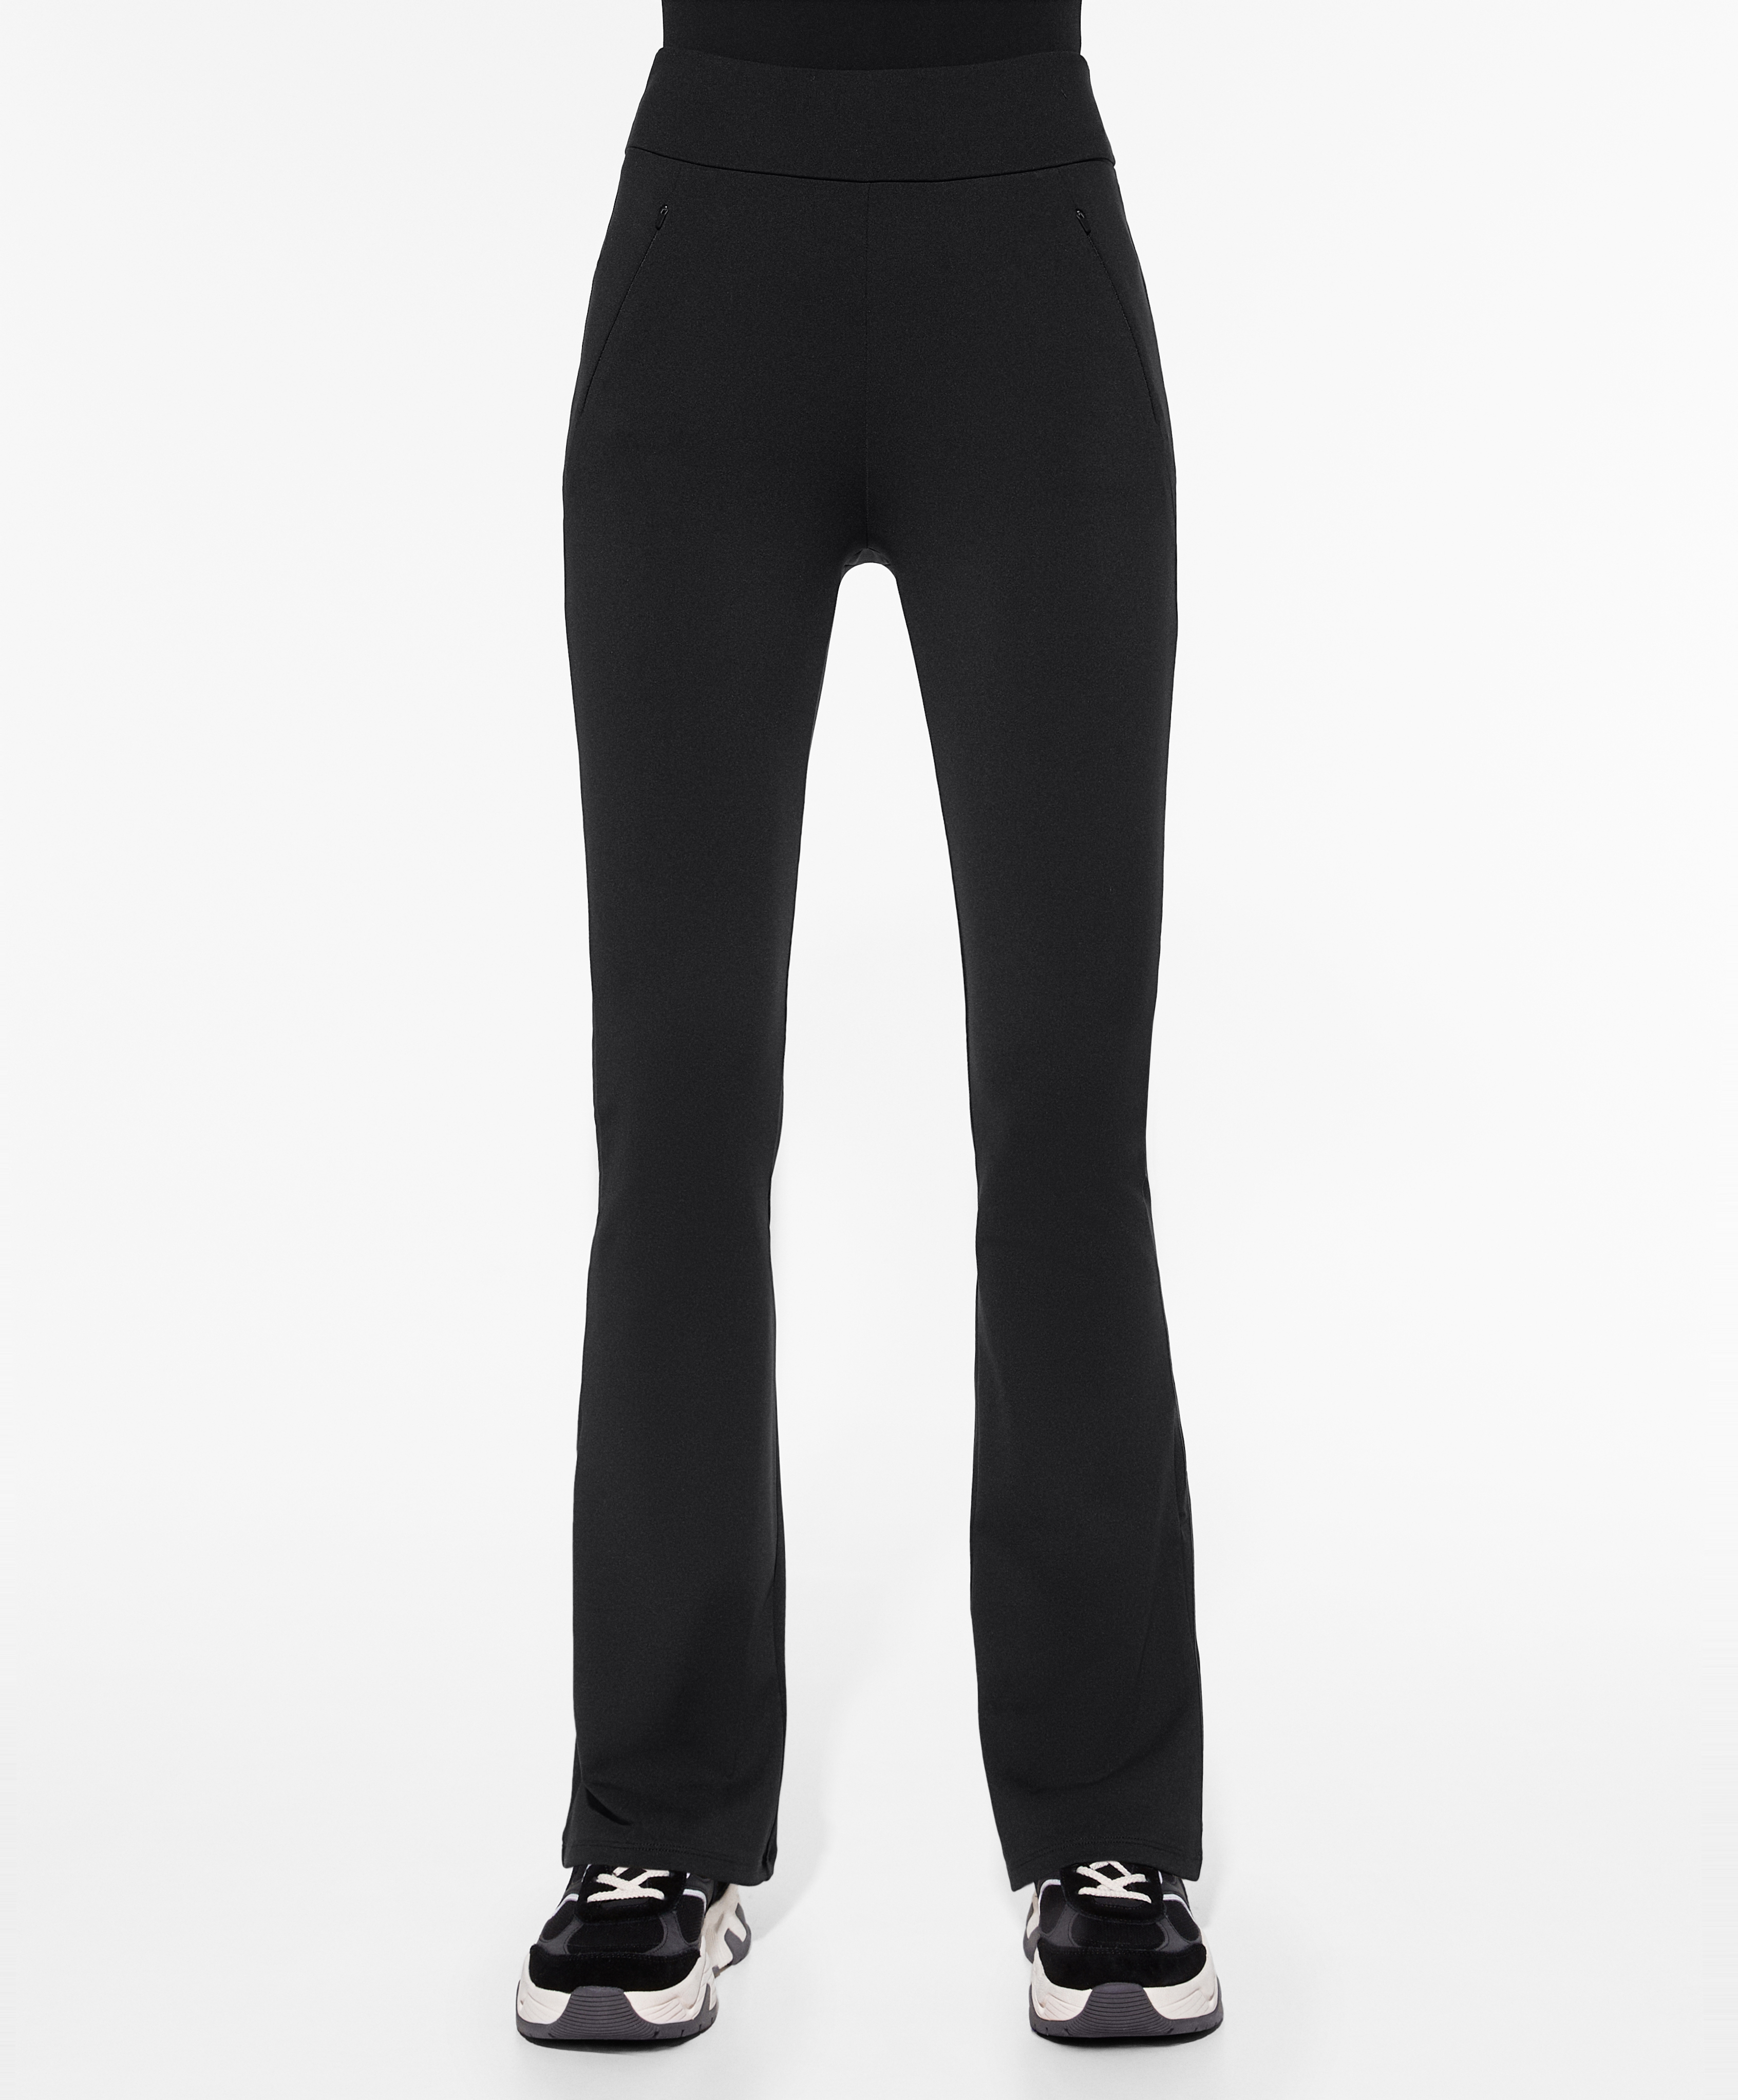 Light warm flare trousers